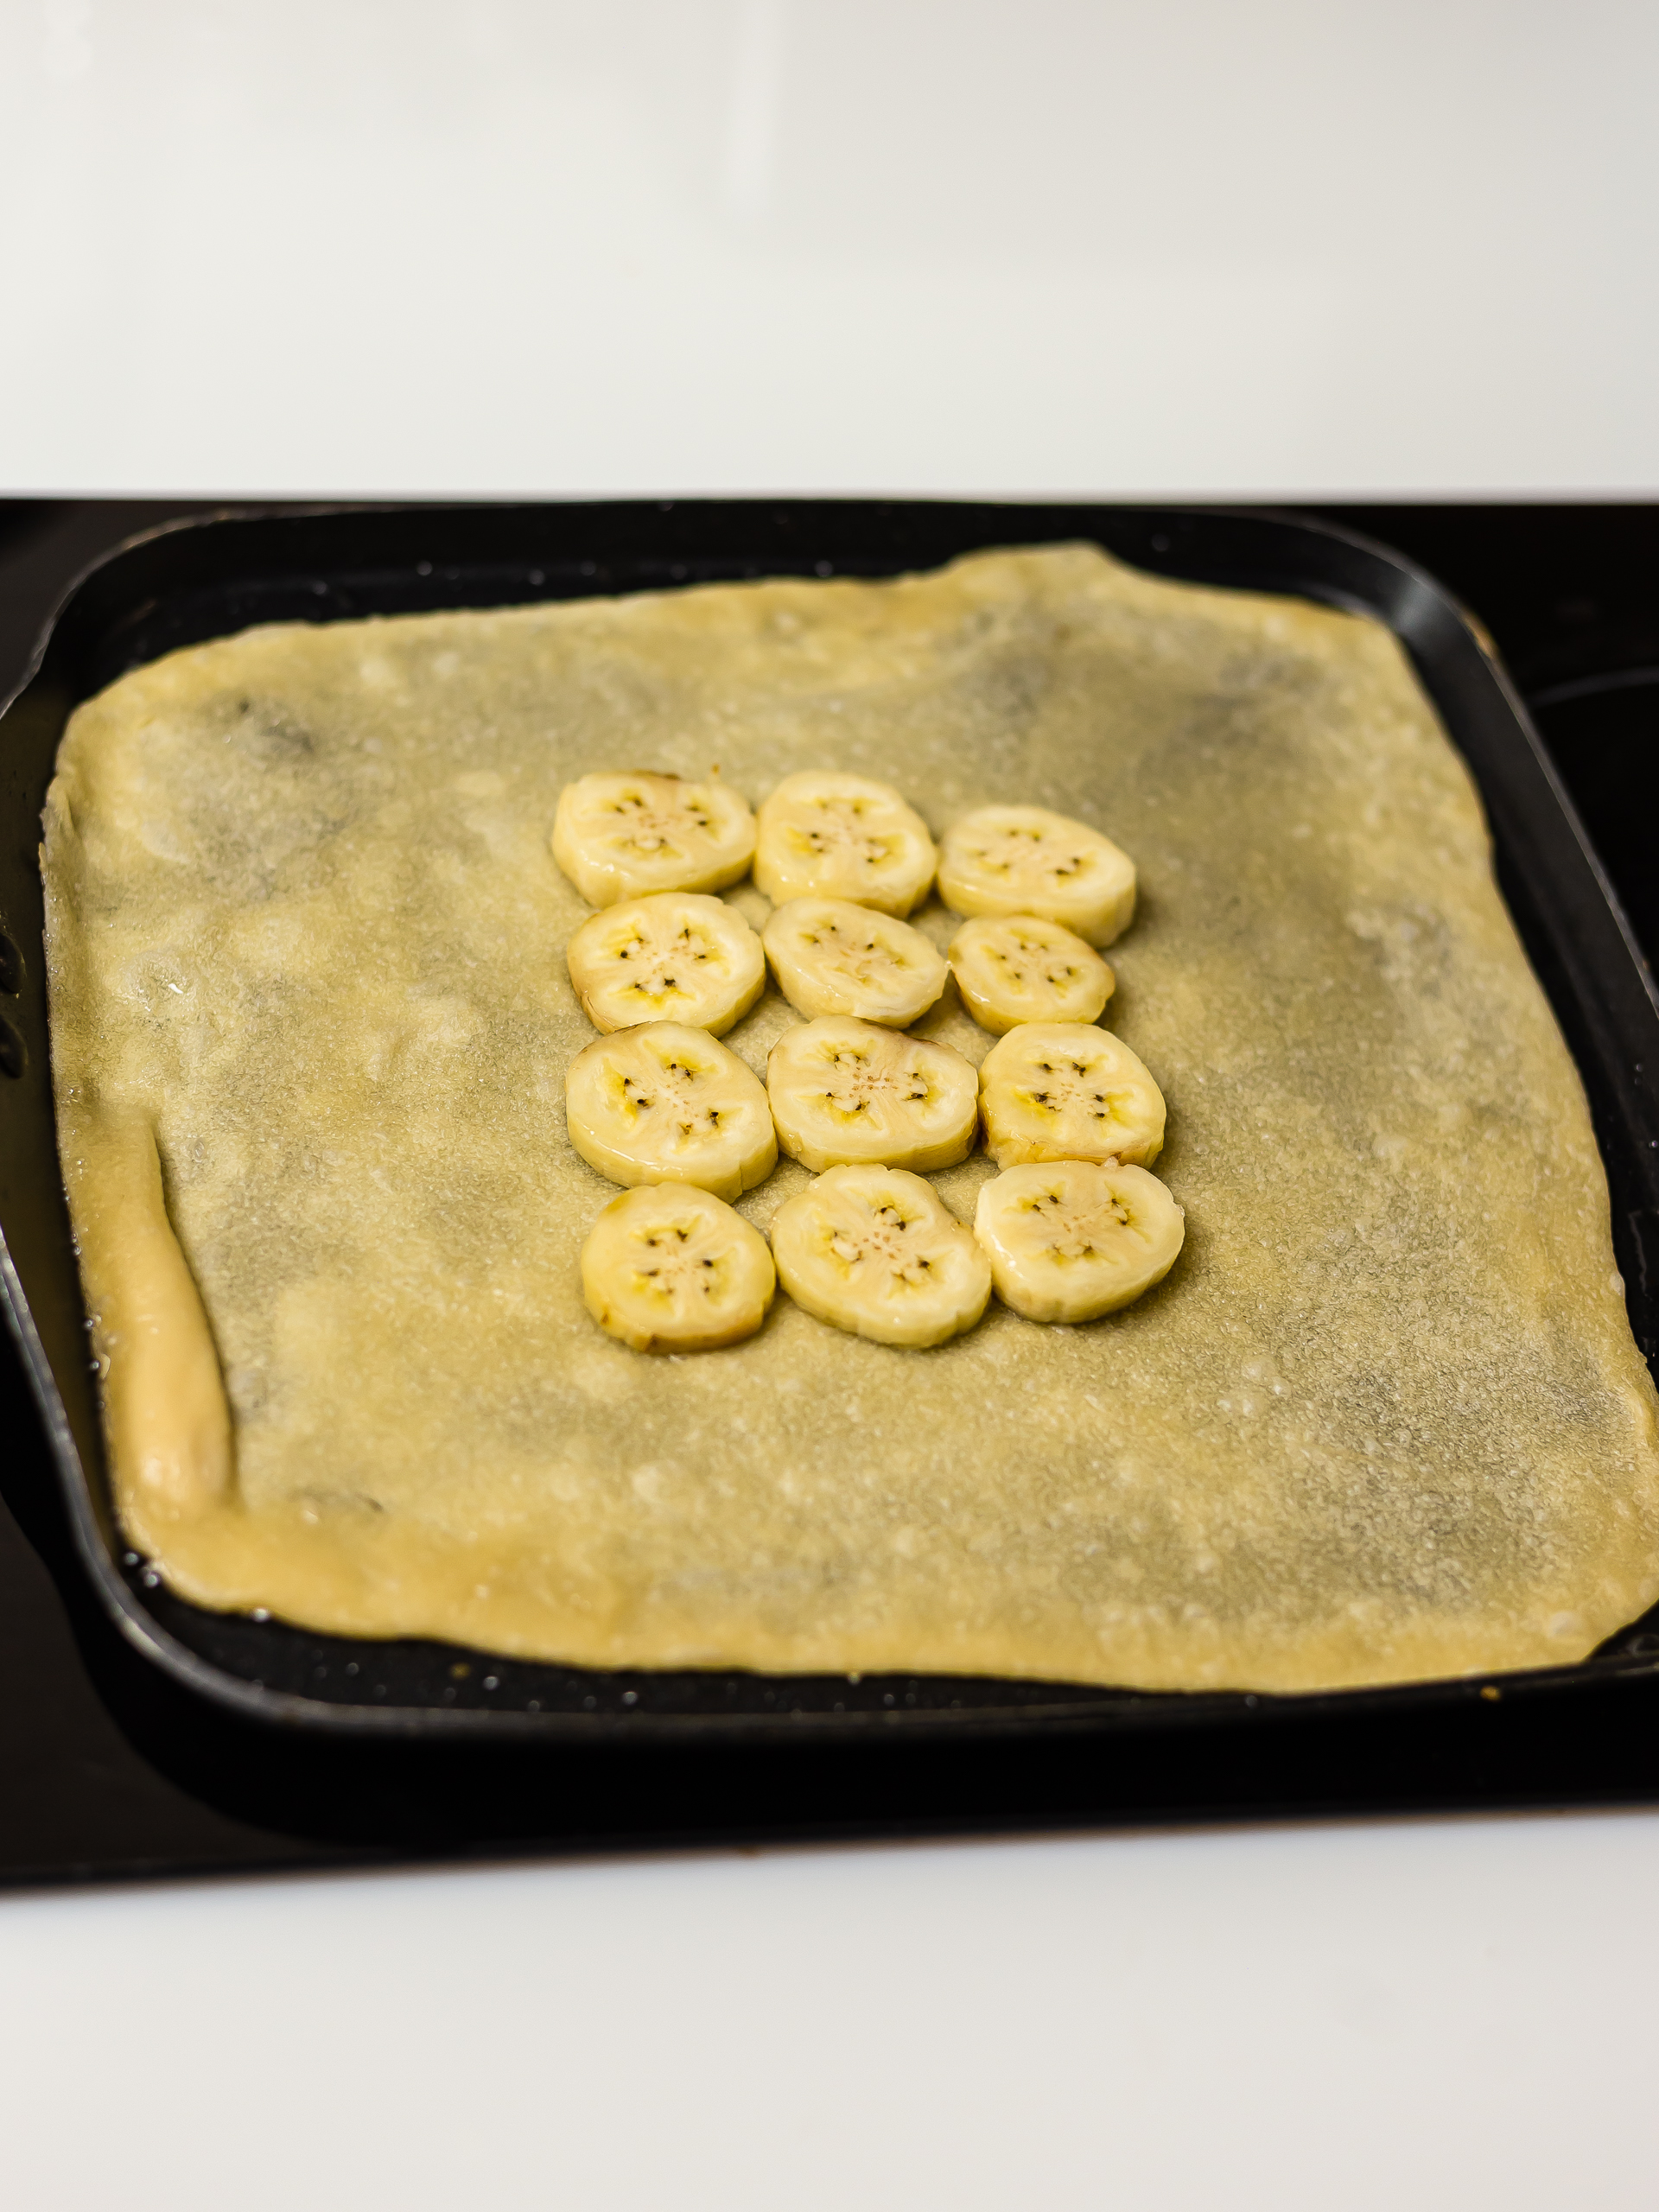 thai pancake with banana slices in a pan